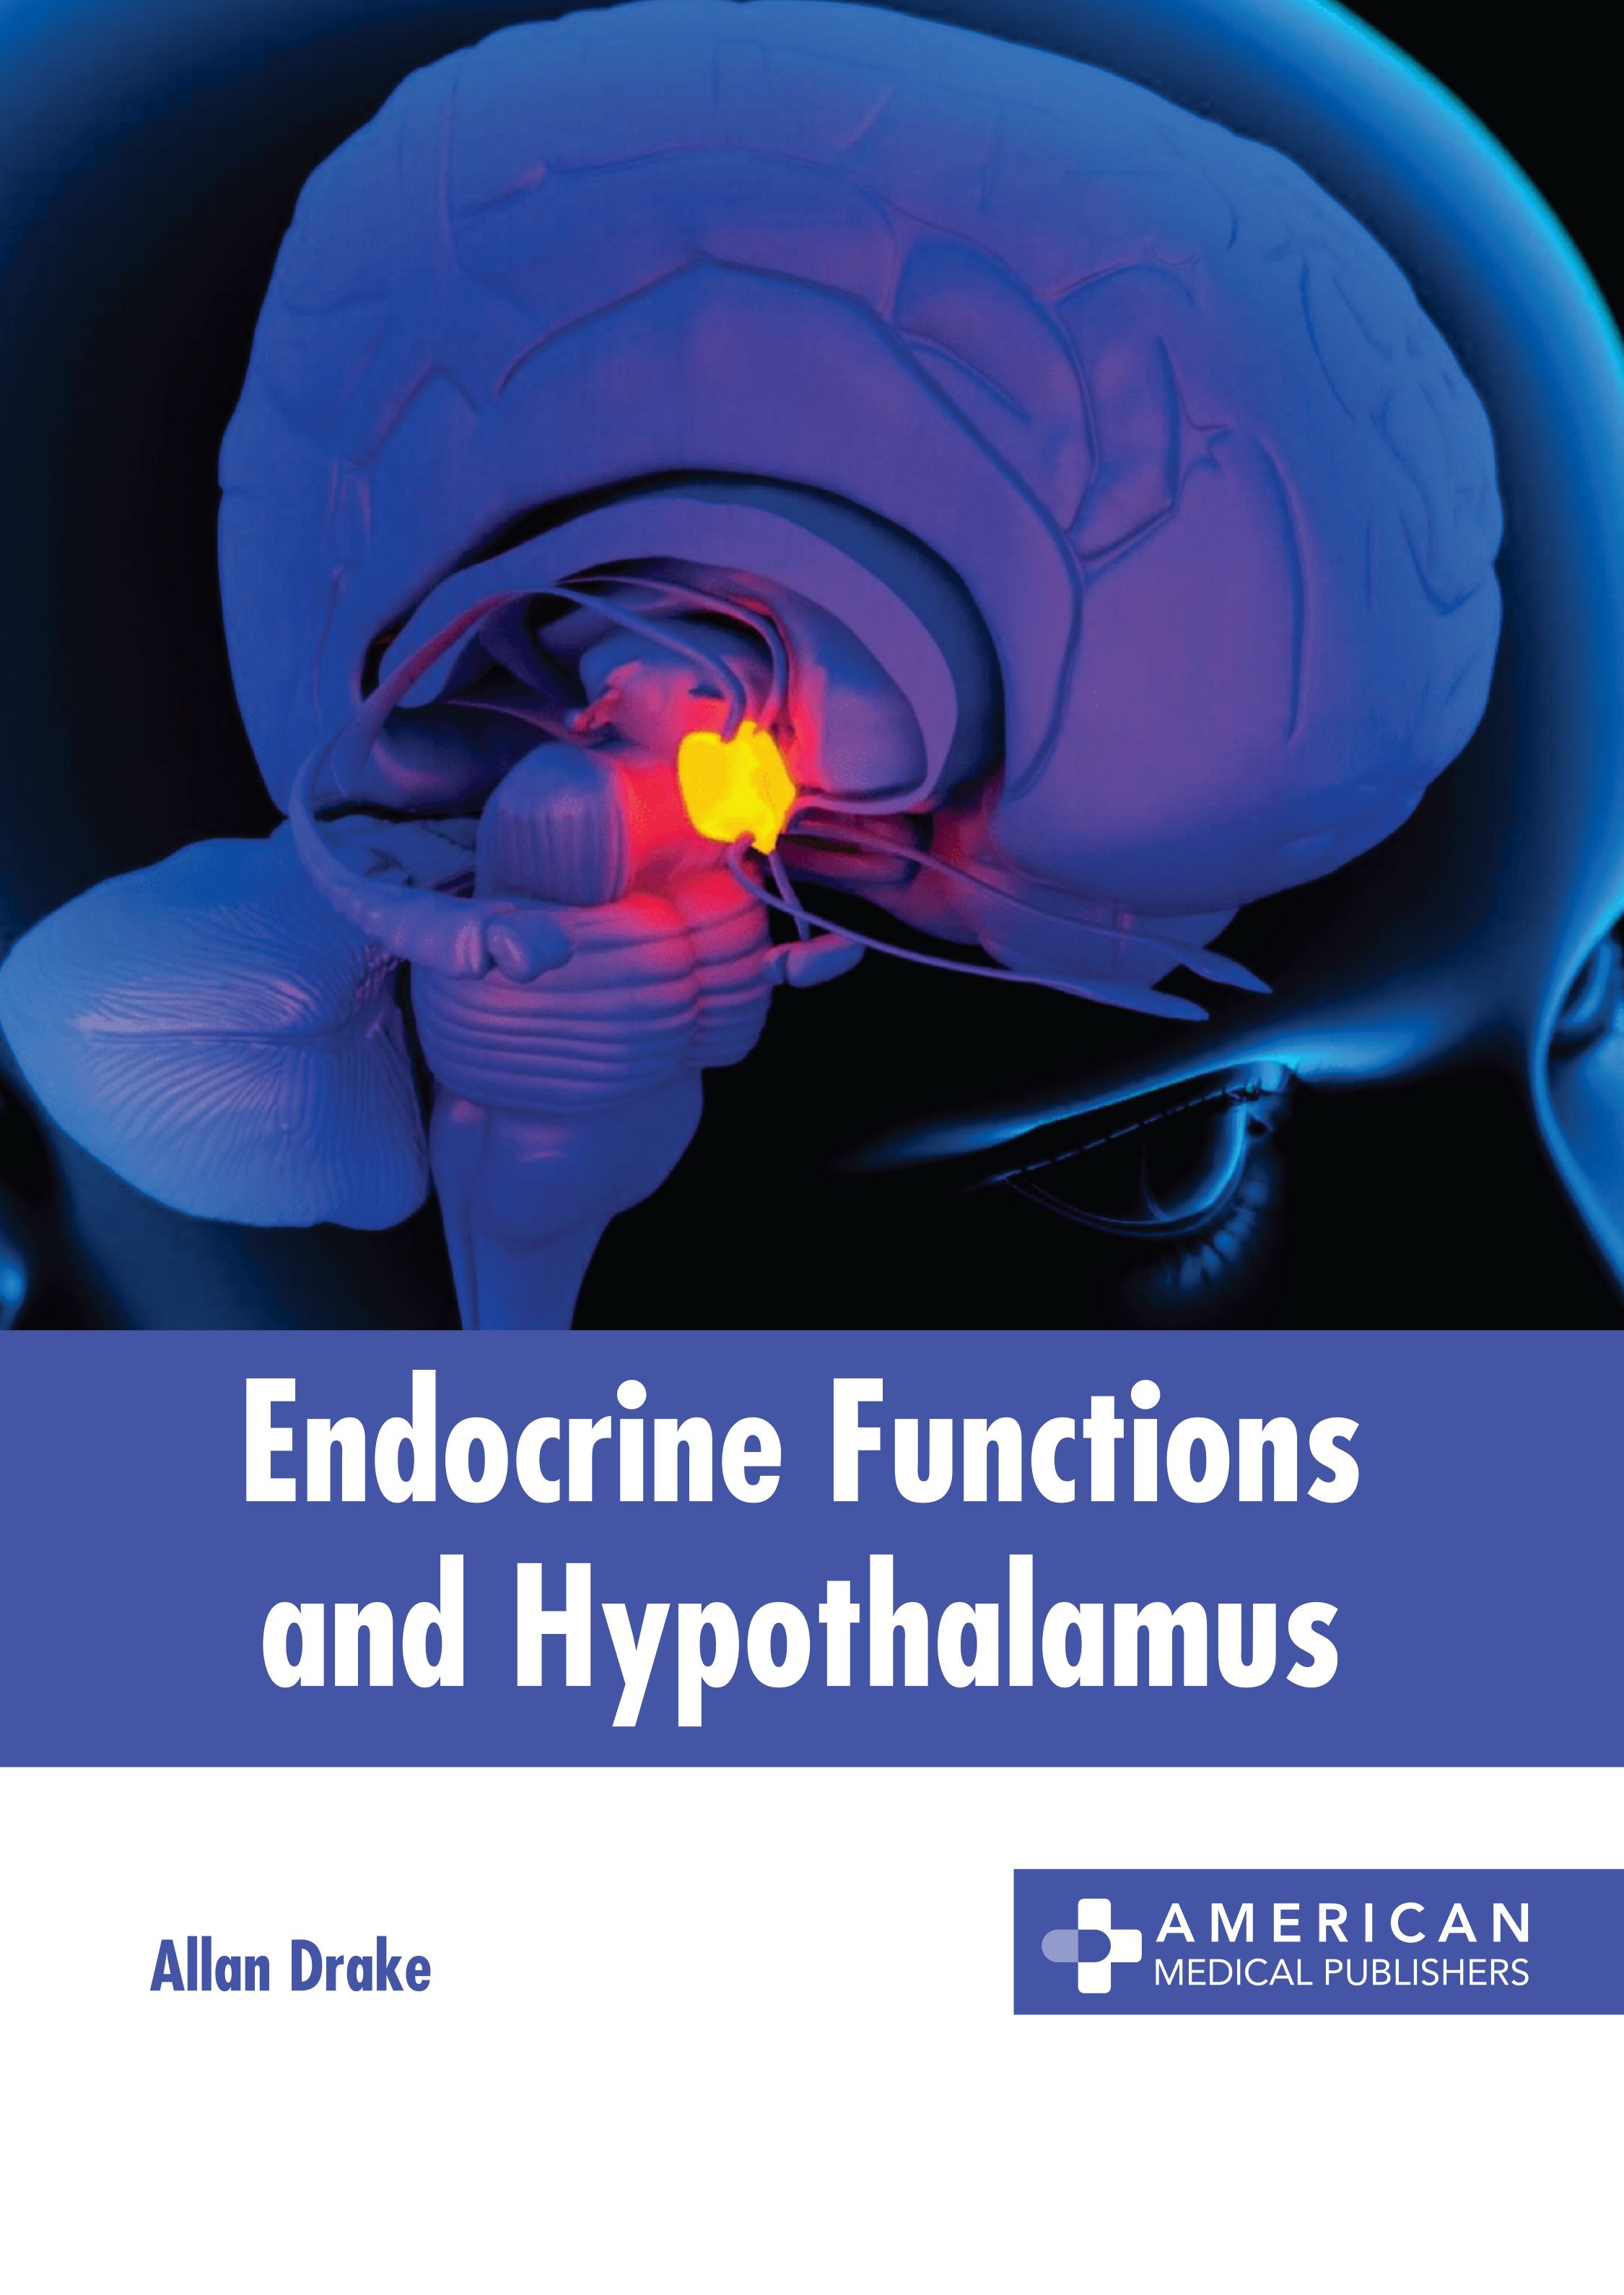 

exclusive-publishers/american-medical-publishers/endocrine-functions-and-hypothalamus-9798887400945